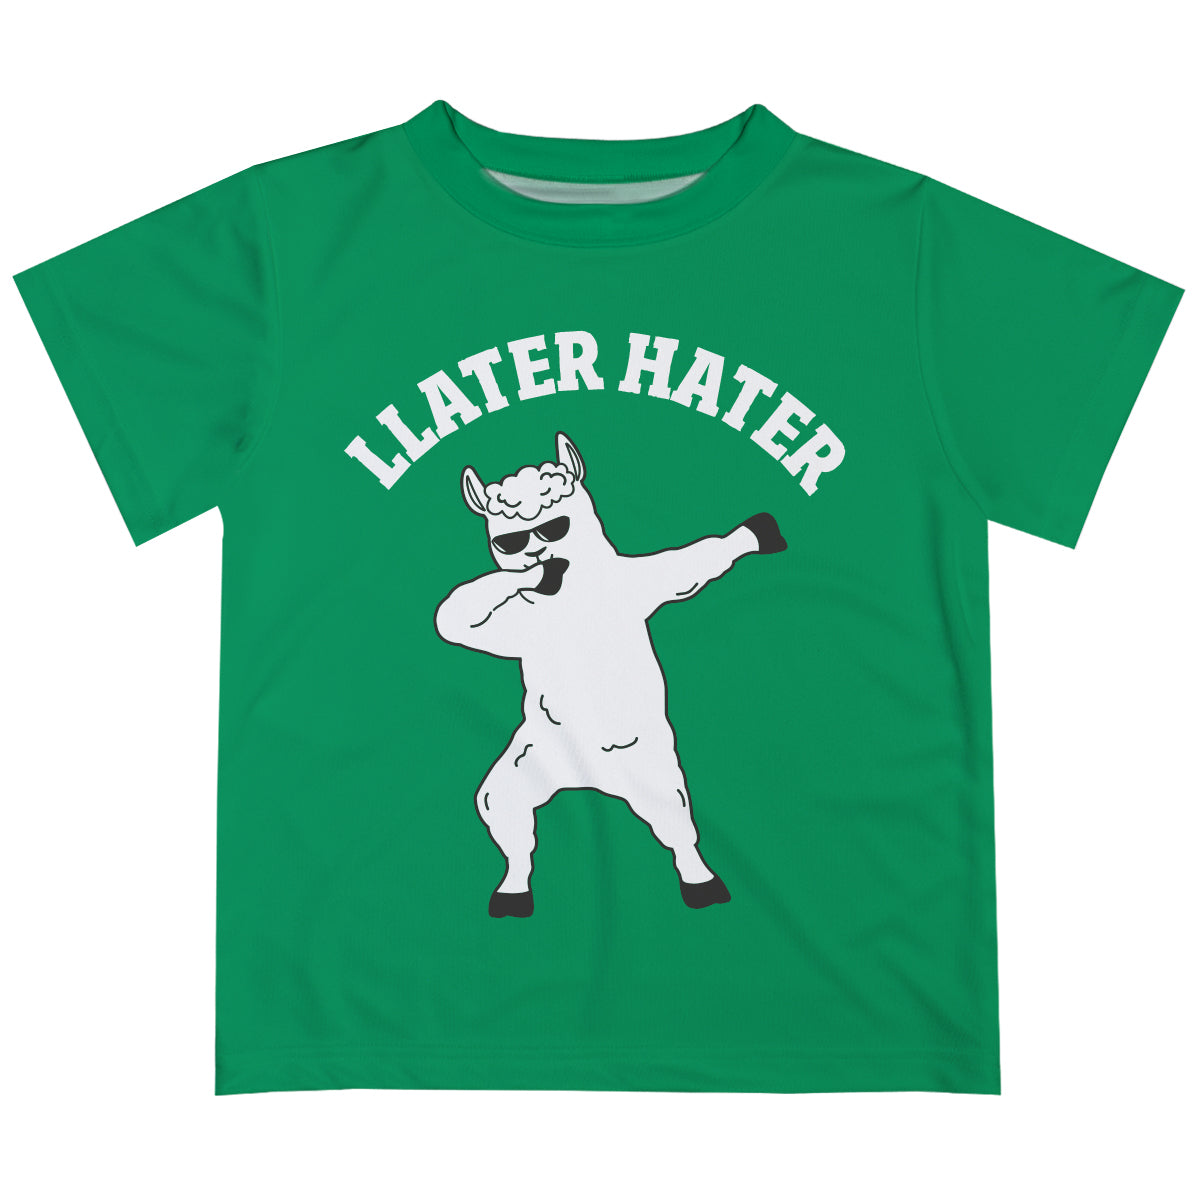 Green and white 'llater hater' boys tee shirt - Wimziy&Co.